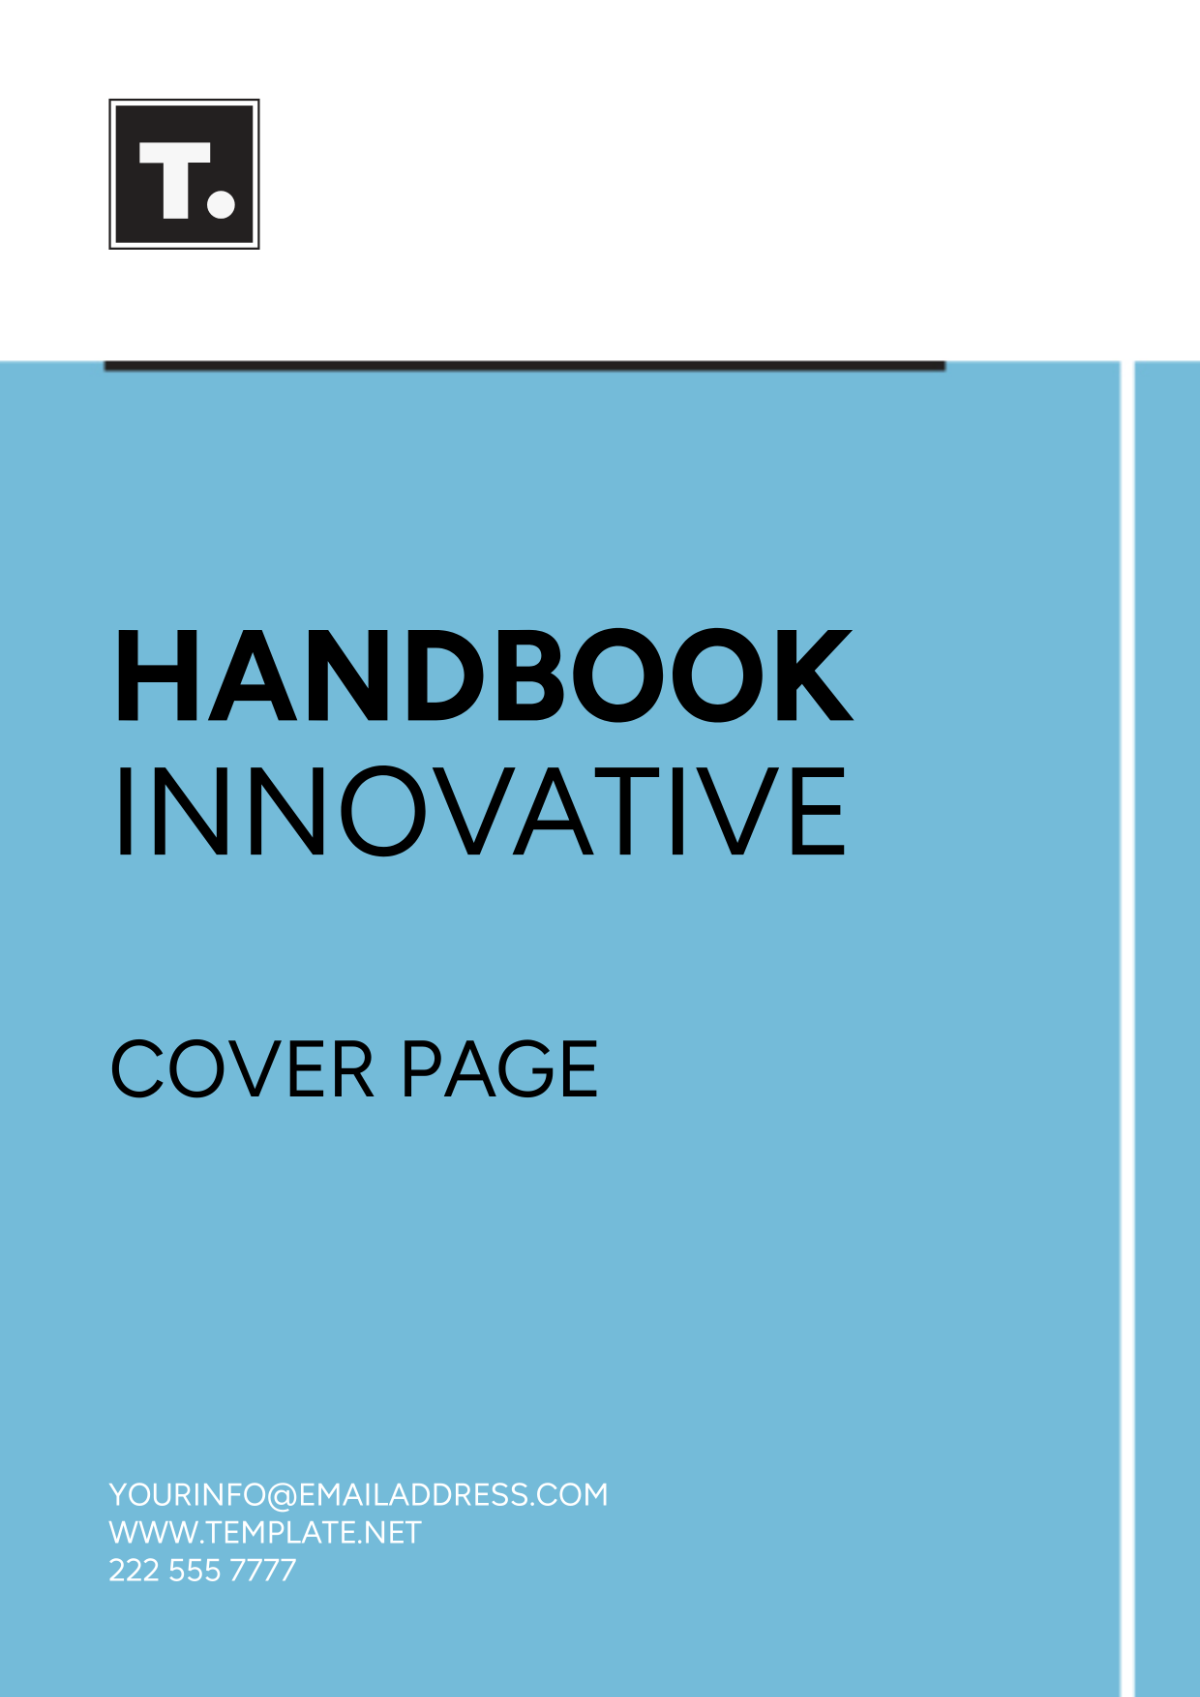 Free Handbook Innovative Cover Page Template